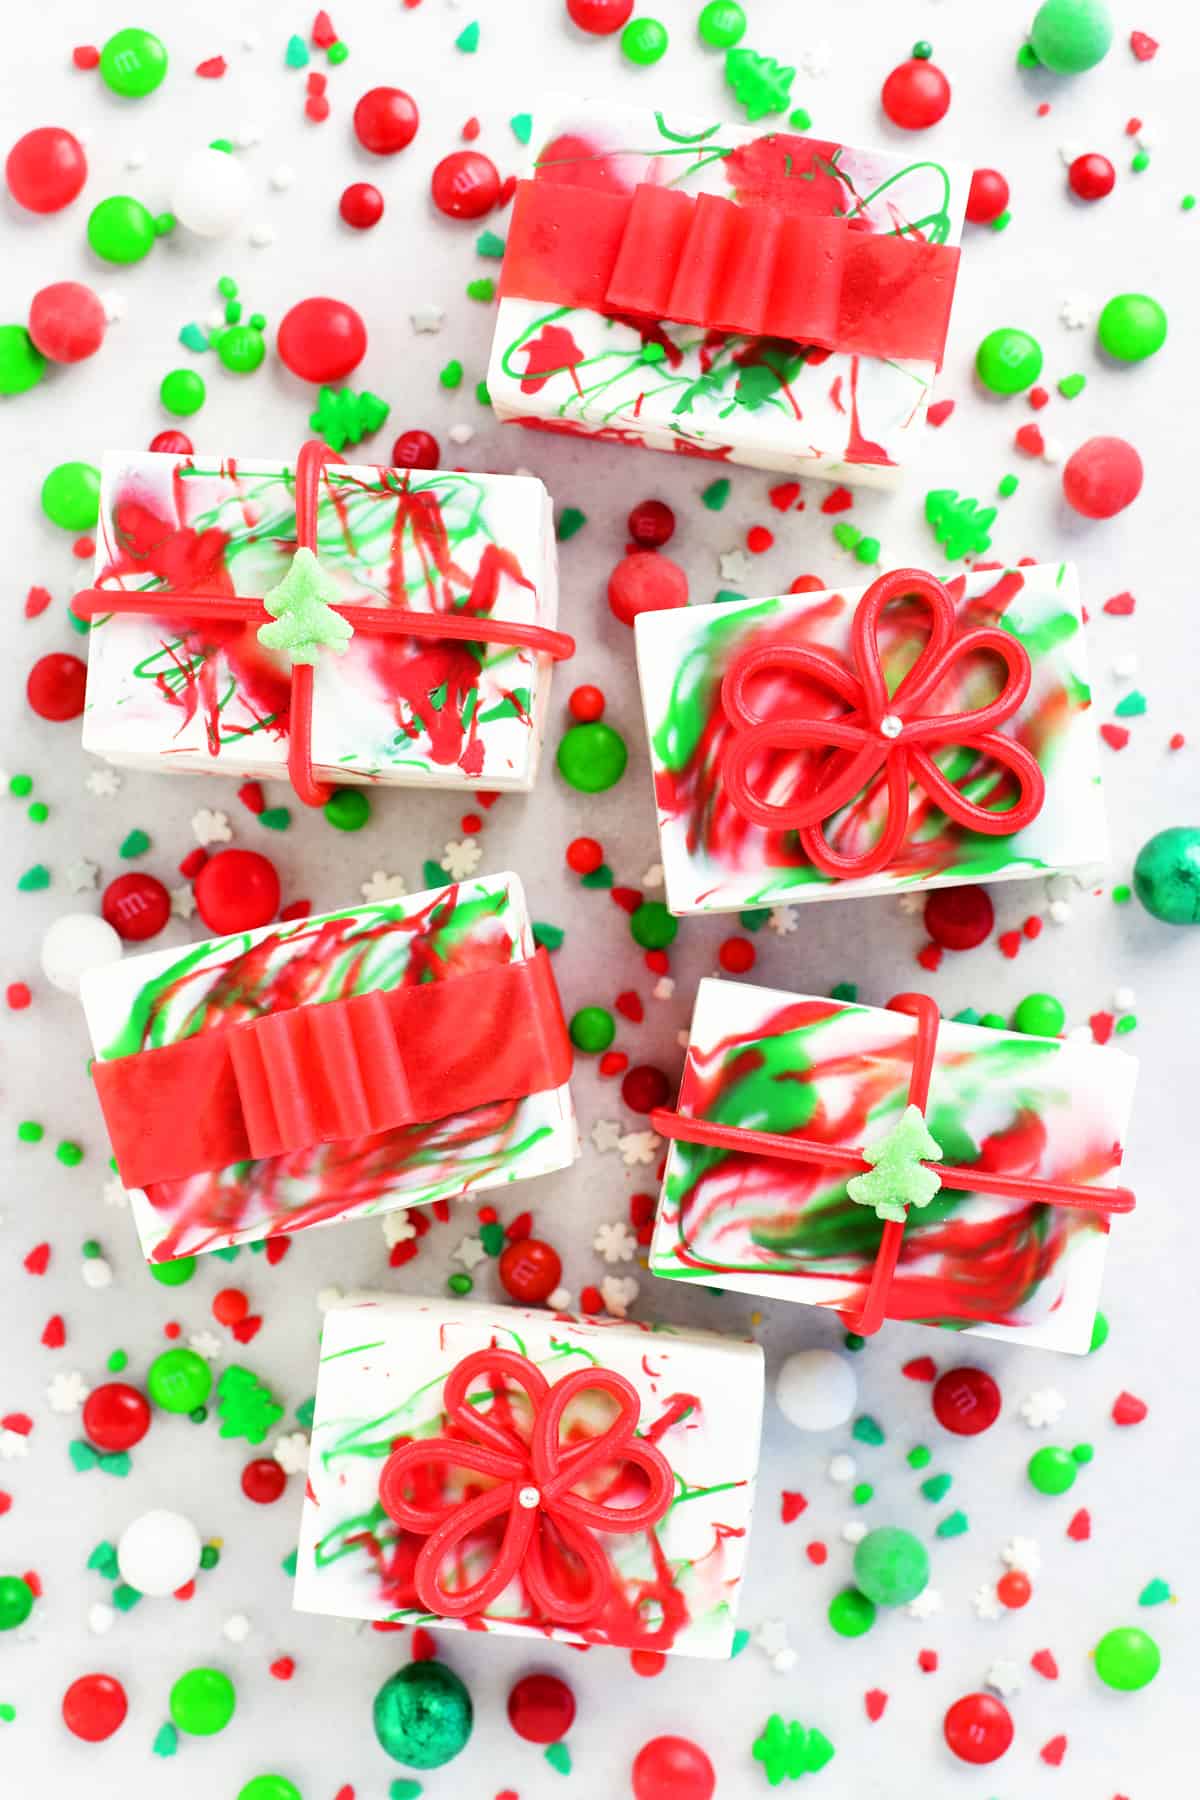 six decorated edible presents